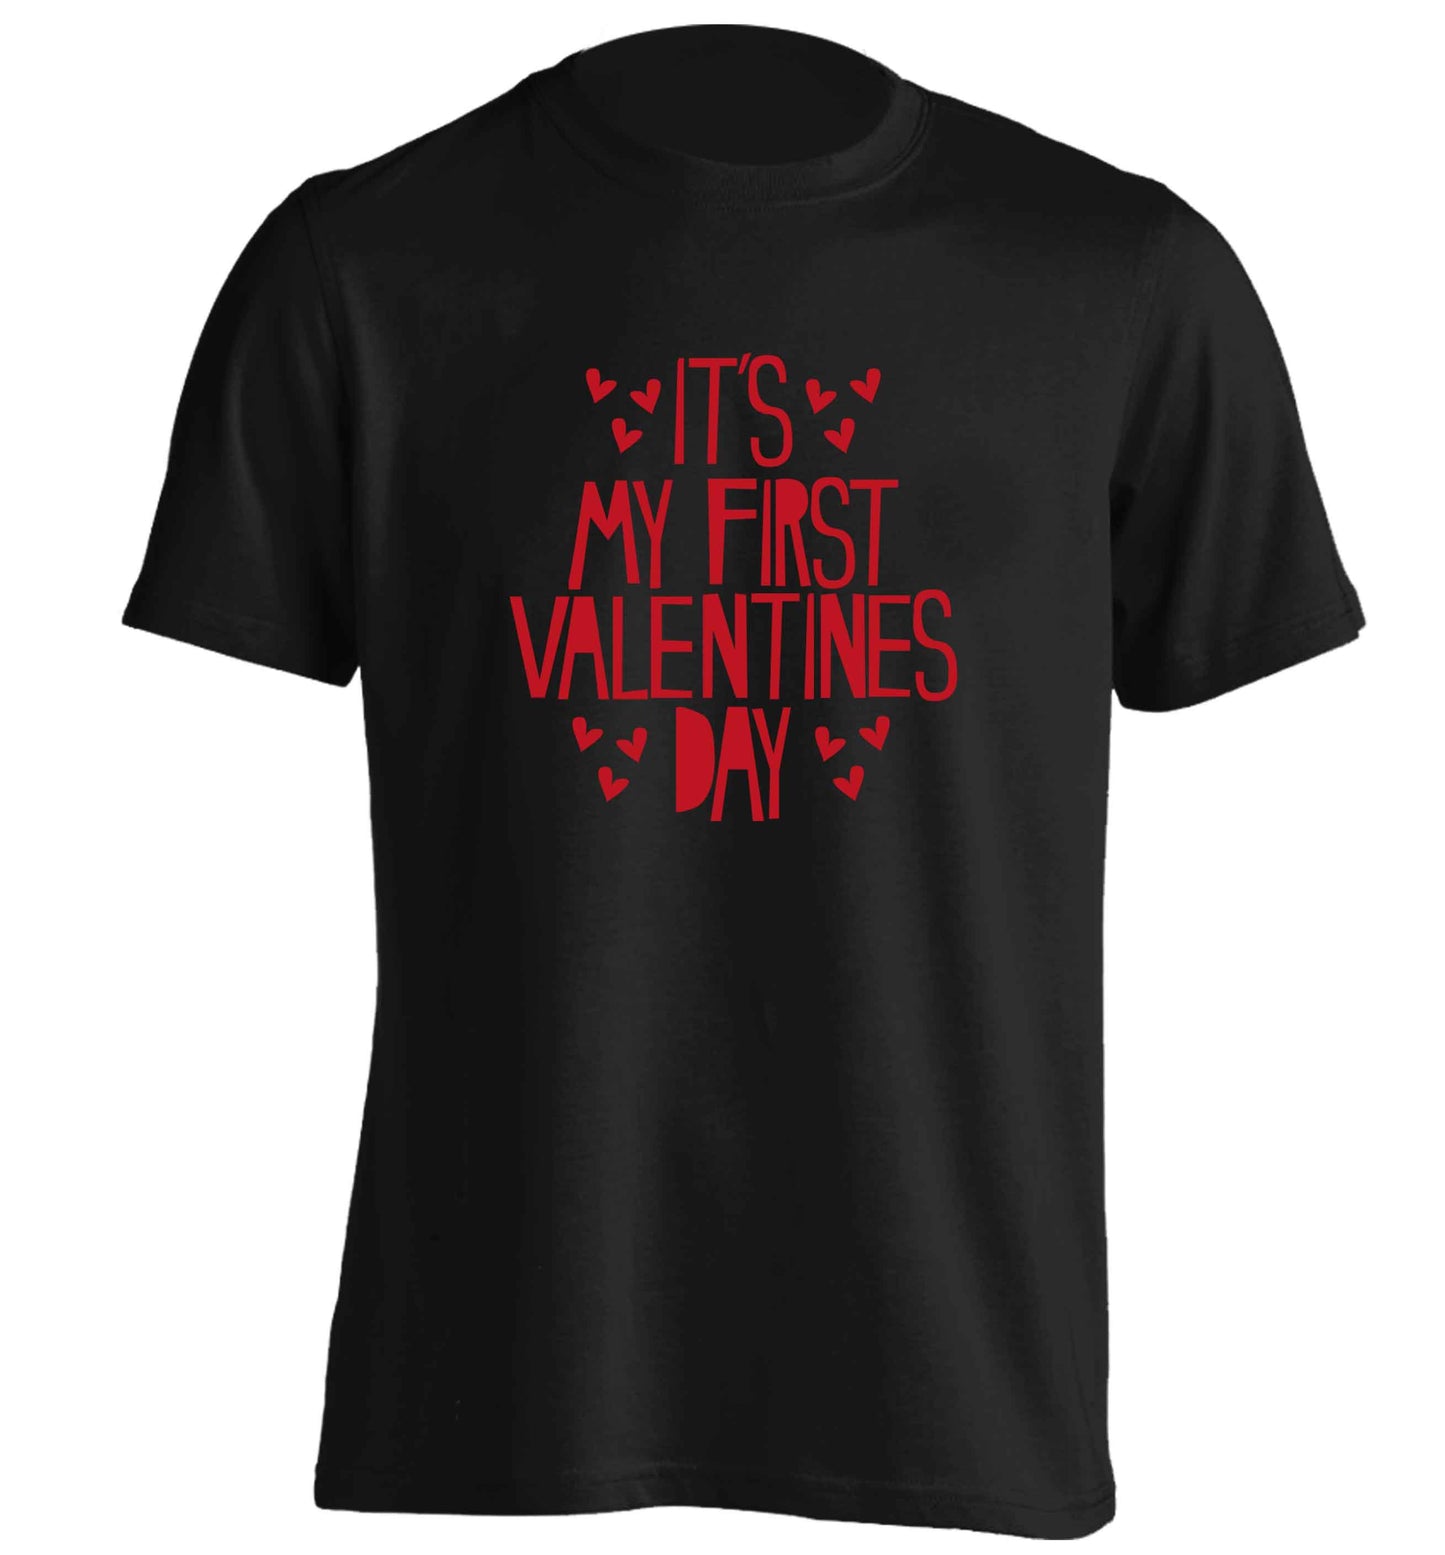 Hearts It's my First Valentine's Day adults unisex black Tshirt 2XL